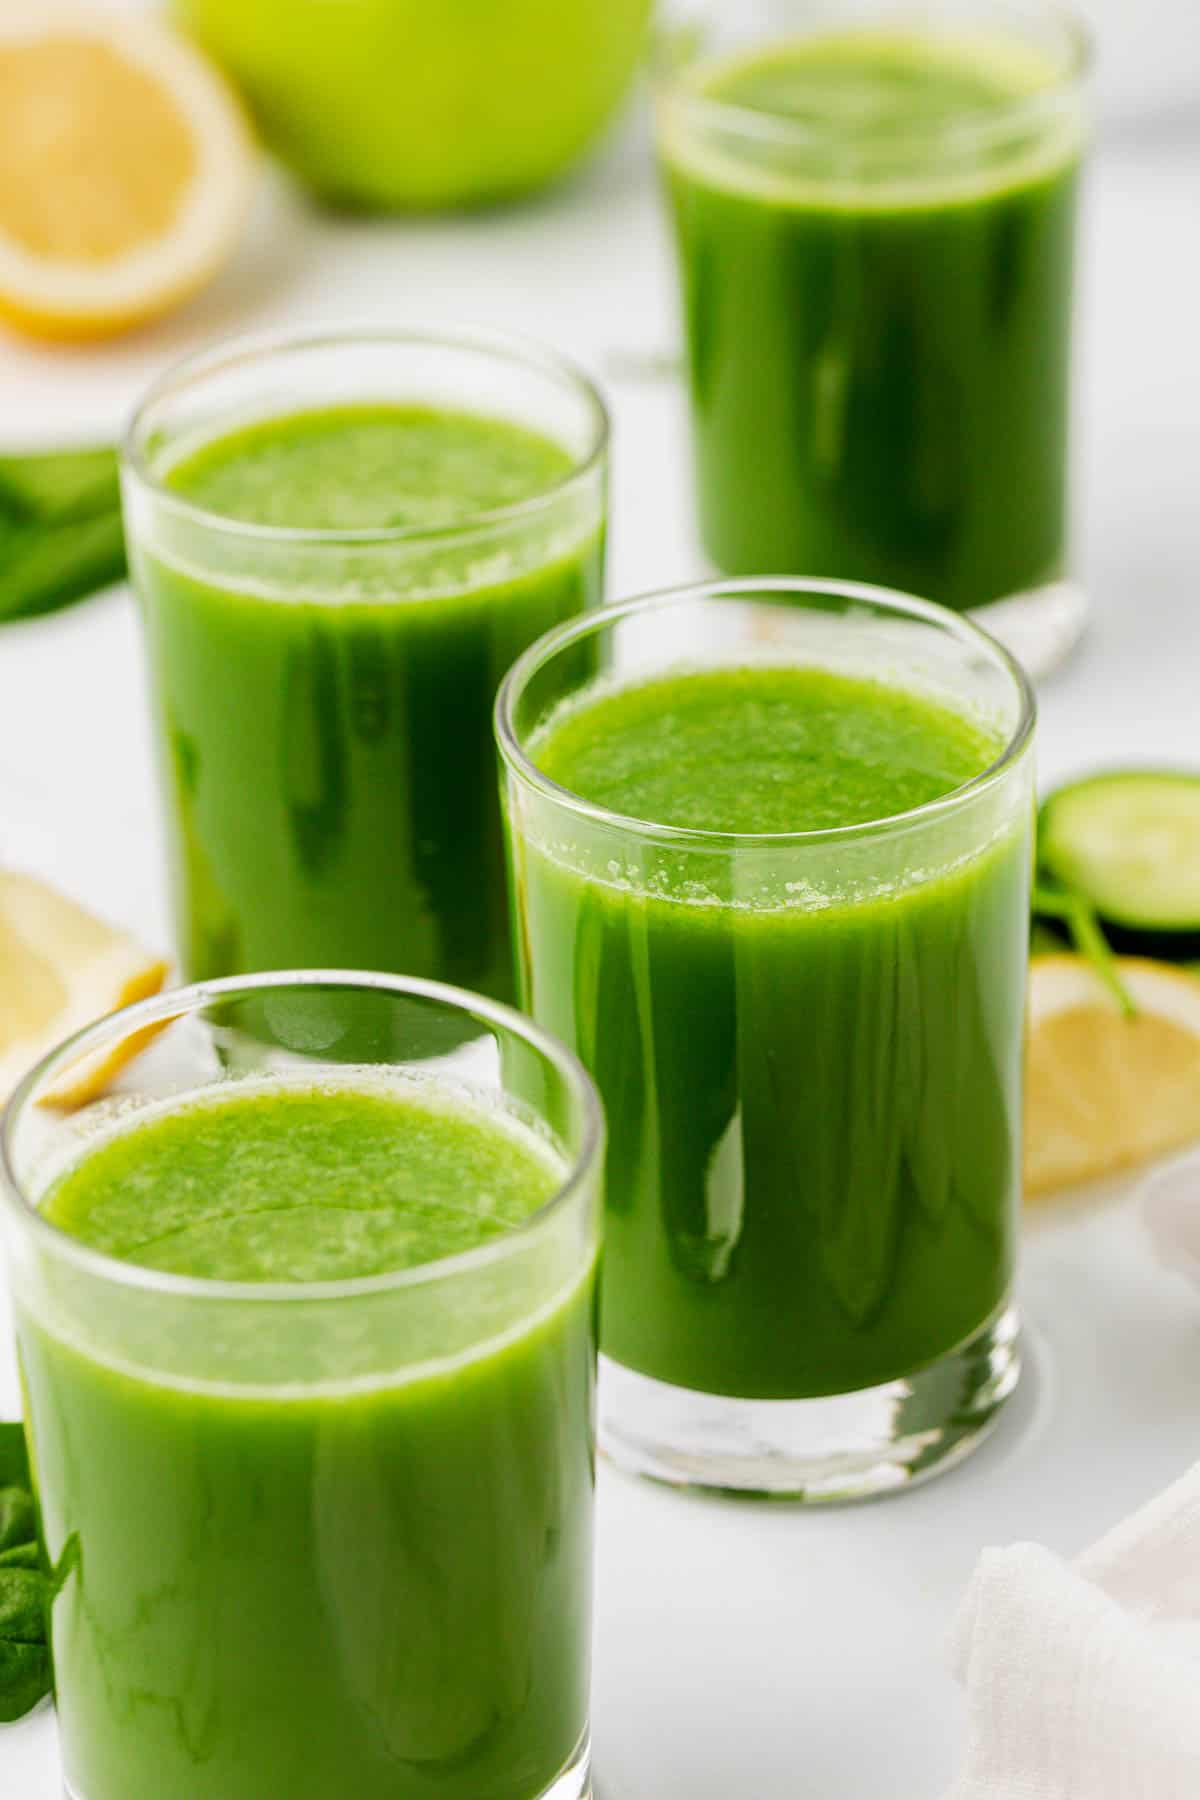 spinach juice in a glass